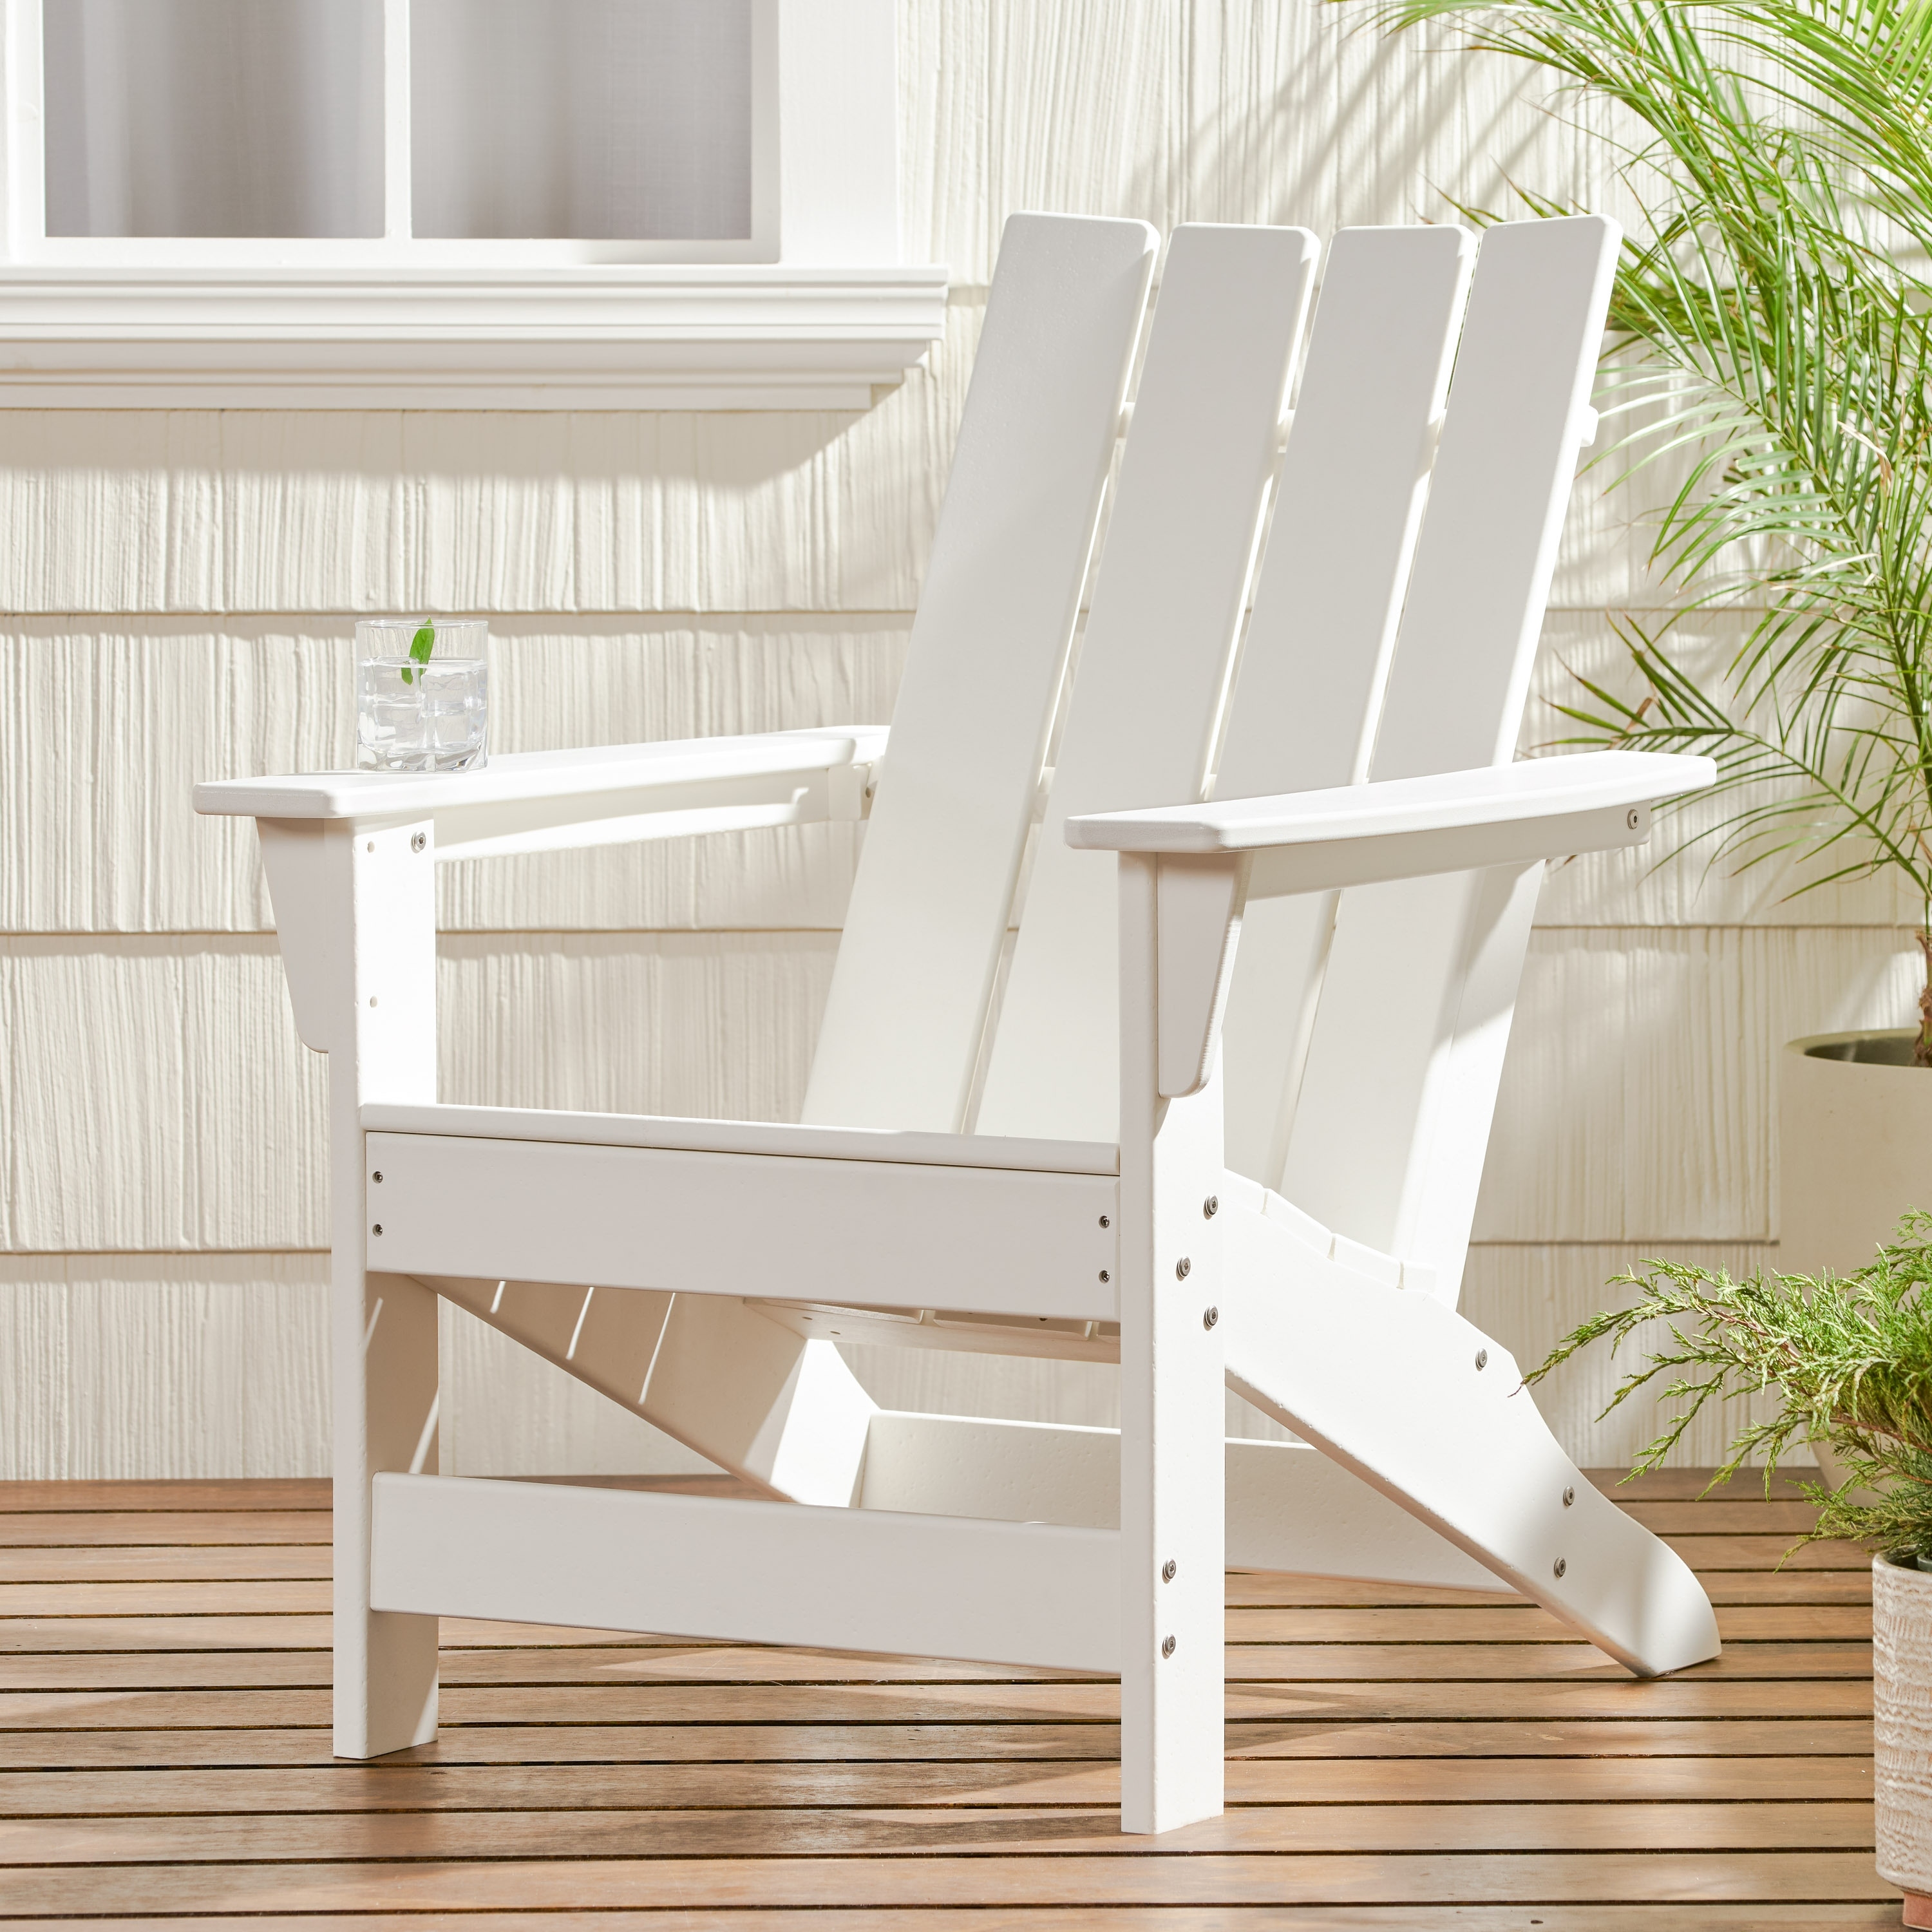 Encino Outdoor Resin Adirondack Chair By Christopher Knight Home